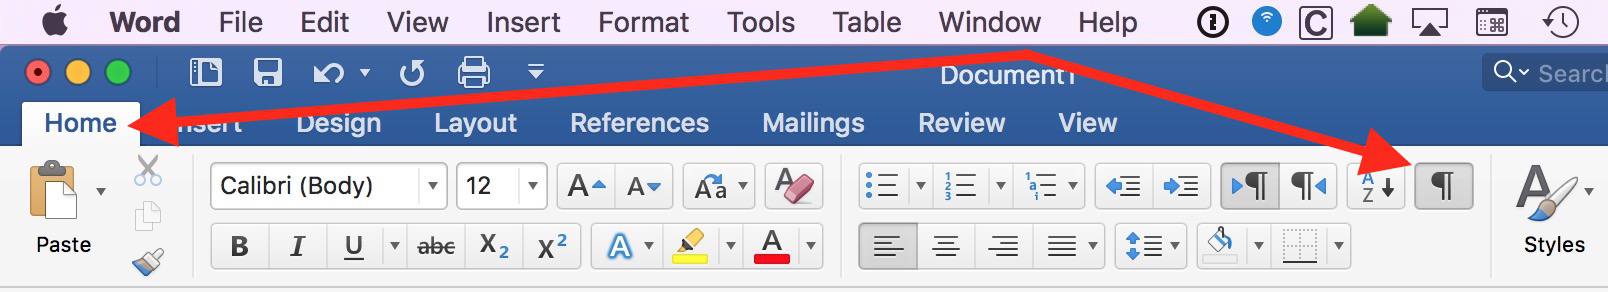 Home Tab in Word shows the Paragraph button, which shows or hides invisible characters (nonprinting characters)